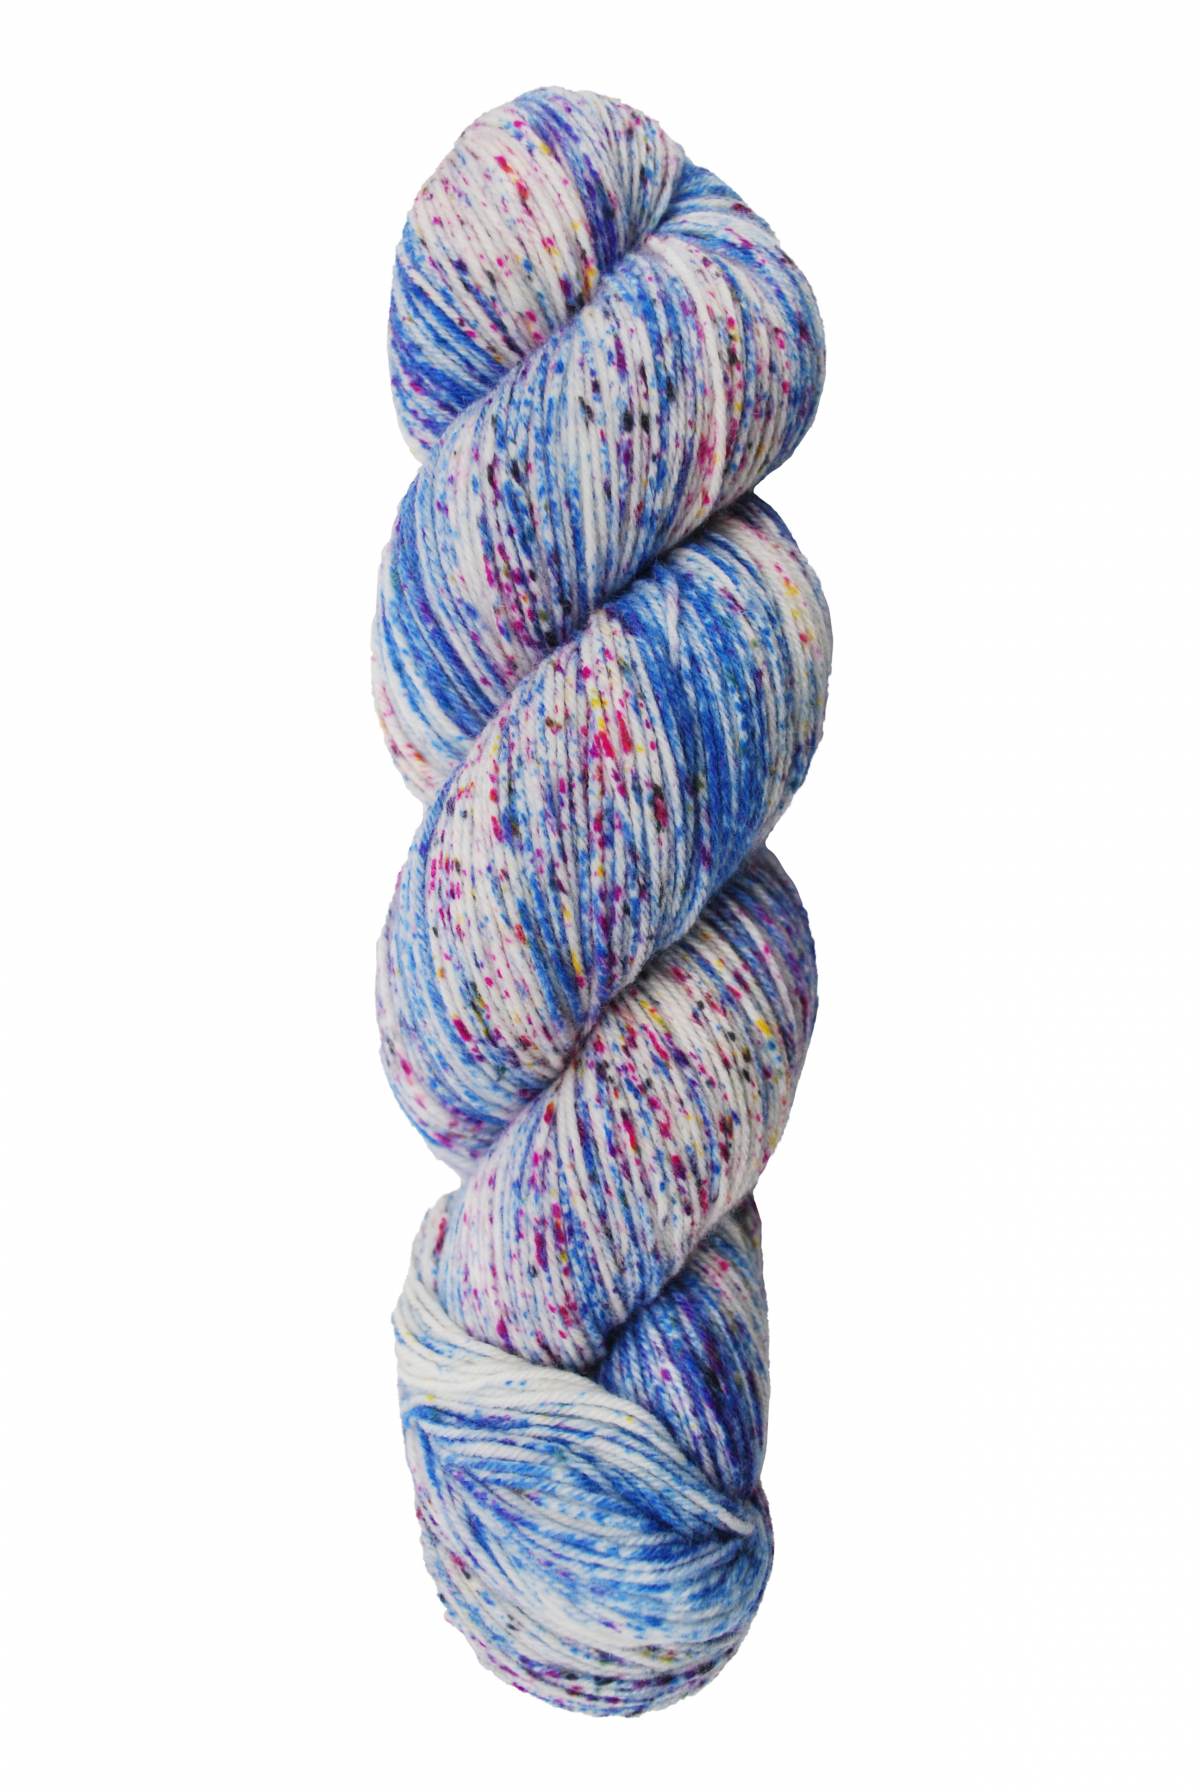 Araucania Huasco Color Hand-Painted 50-55% Off Sale at Little Knits!